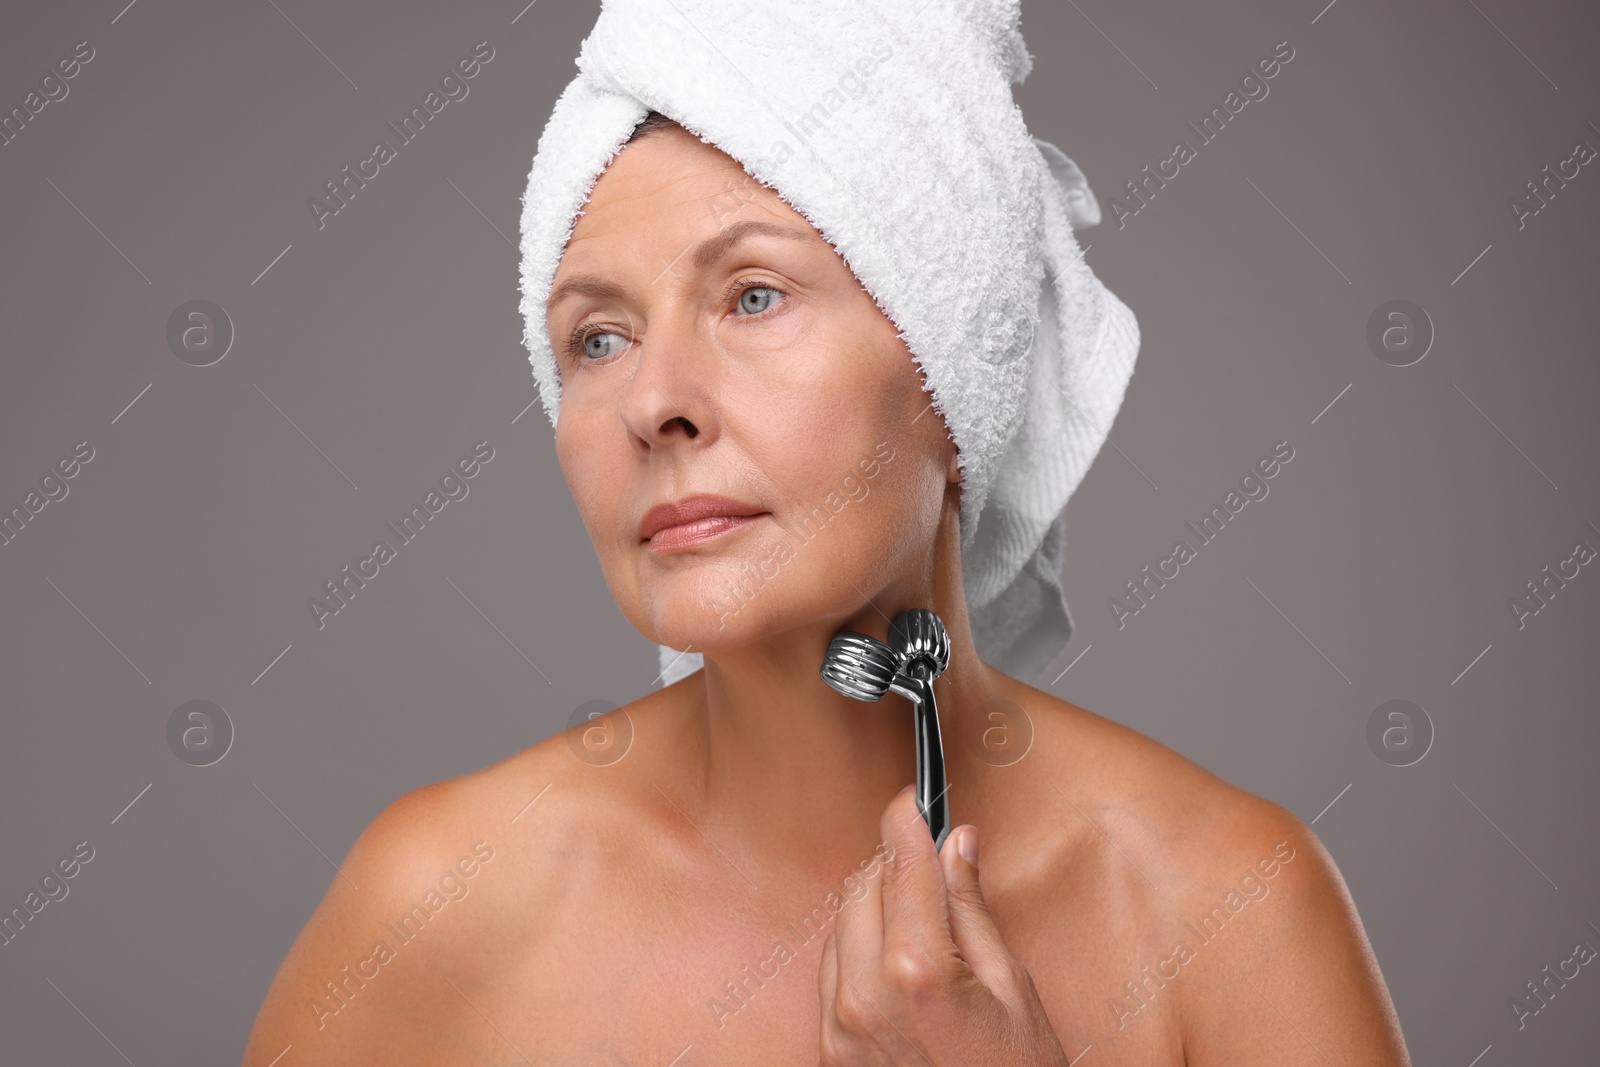 Photo of Woman massaging her face with metal roller on grey background